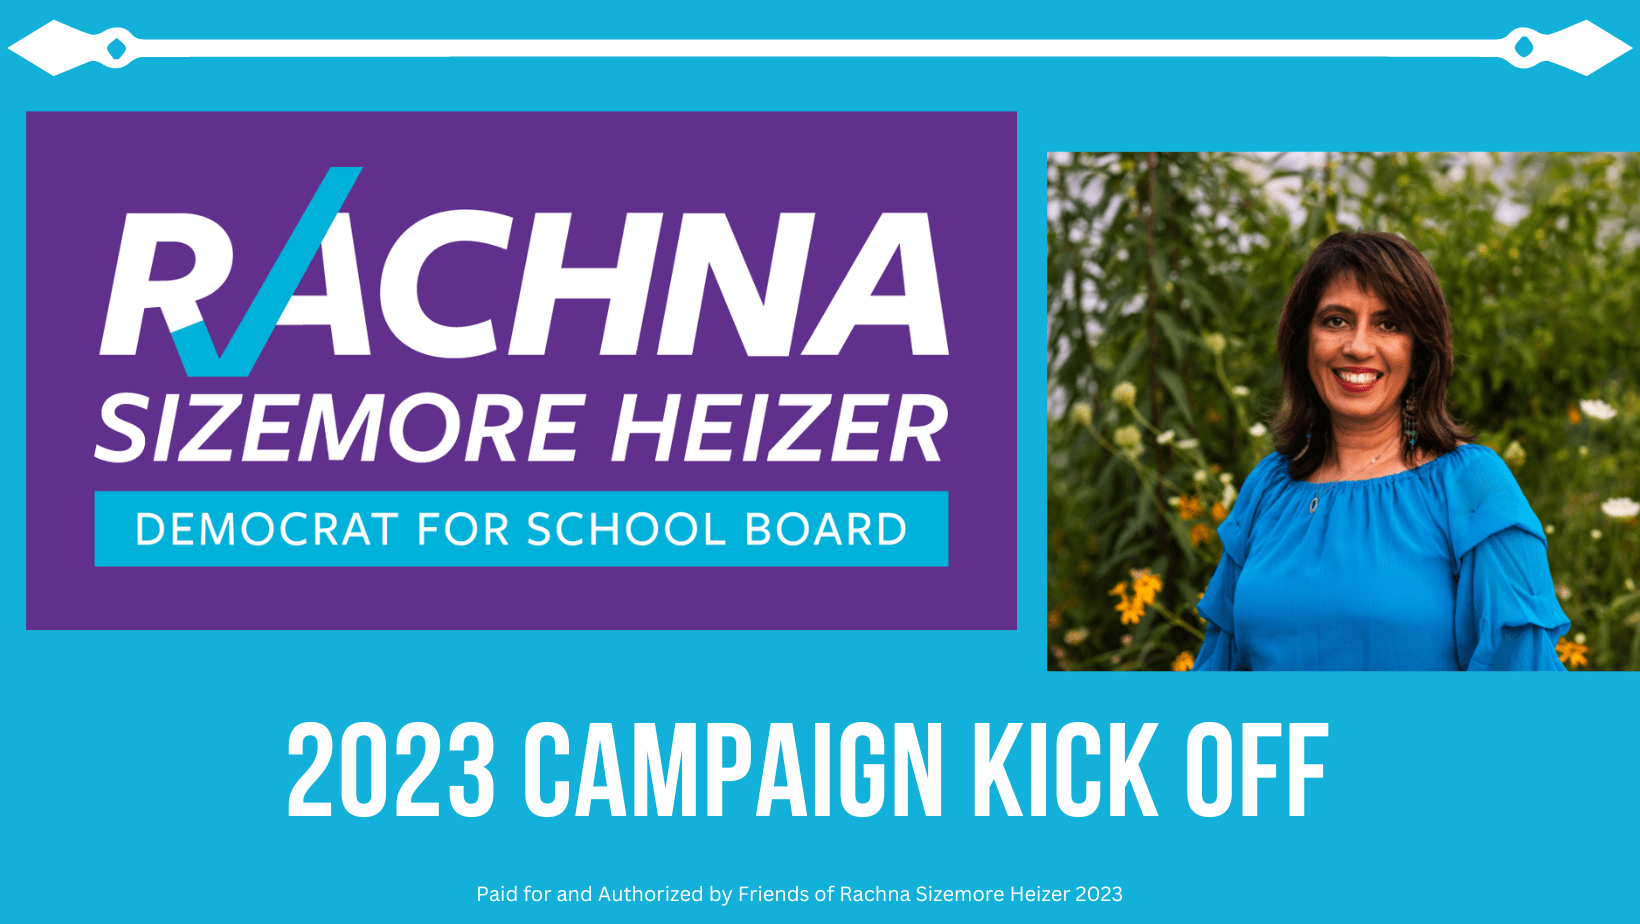 https://www.fairfaxdemocrats.org/wp-content/uploads/2023/02/Rachna-Sizemore-Heizer-campaign-kickoff-2023-min.png